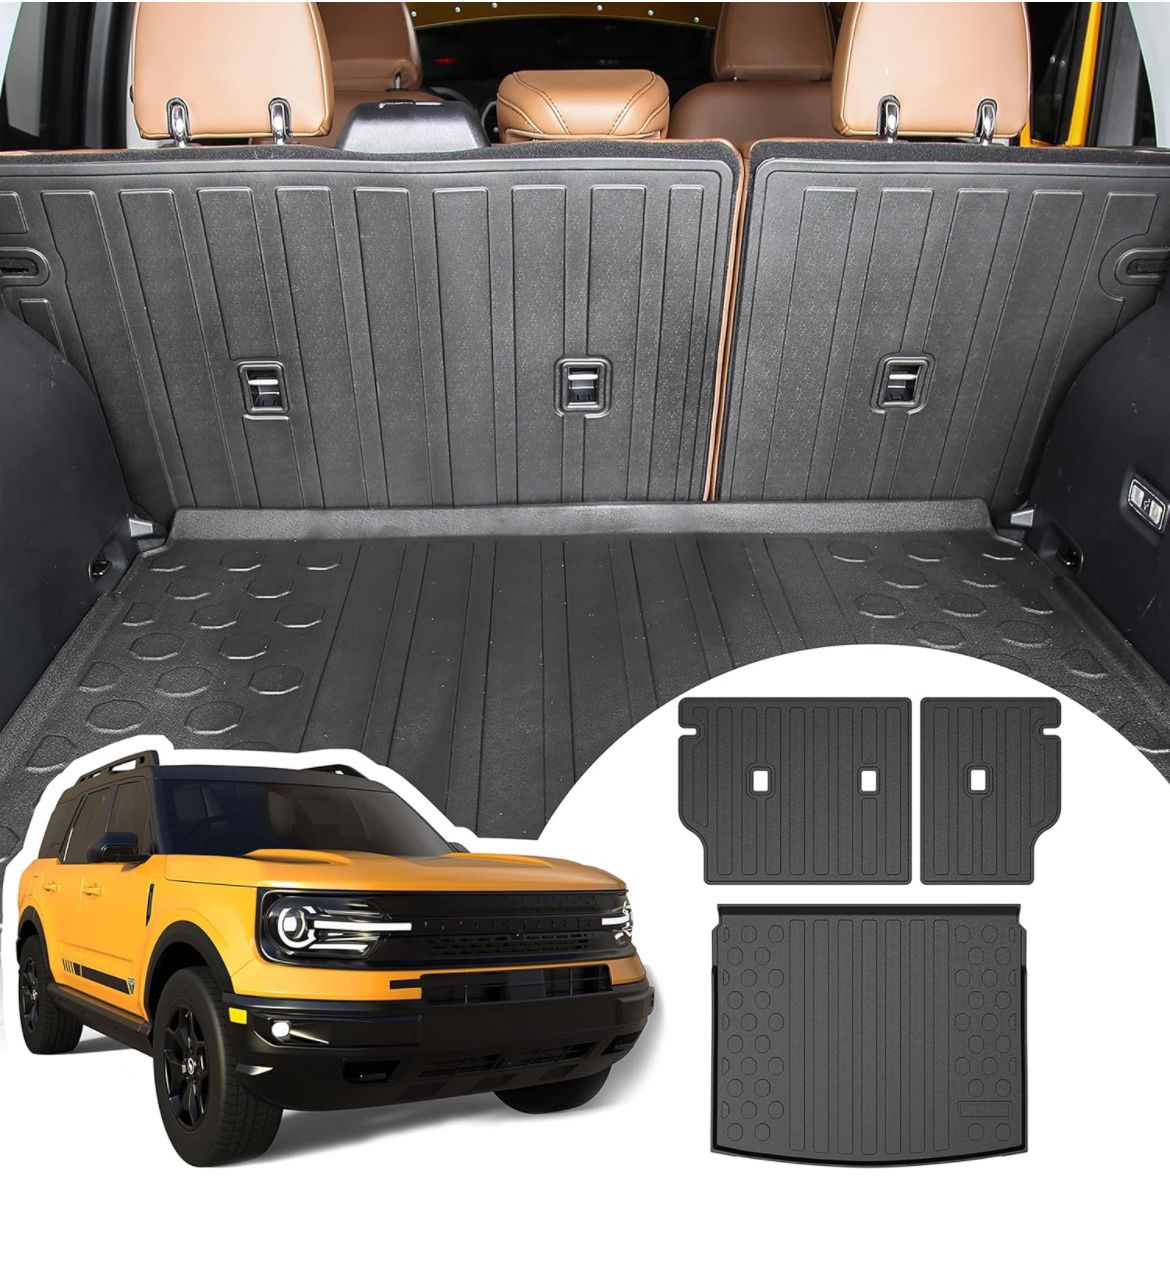 Cargo Liners Rear Trunk Mat for Ford Bronco Sport Accessories 2021 2022 2023 with Hook&Loop All Weather Anti-Slip Split Dog Liner (Rear Trunk Mat +Bac